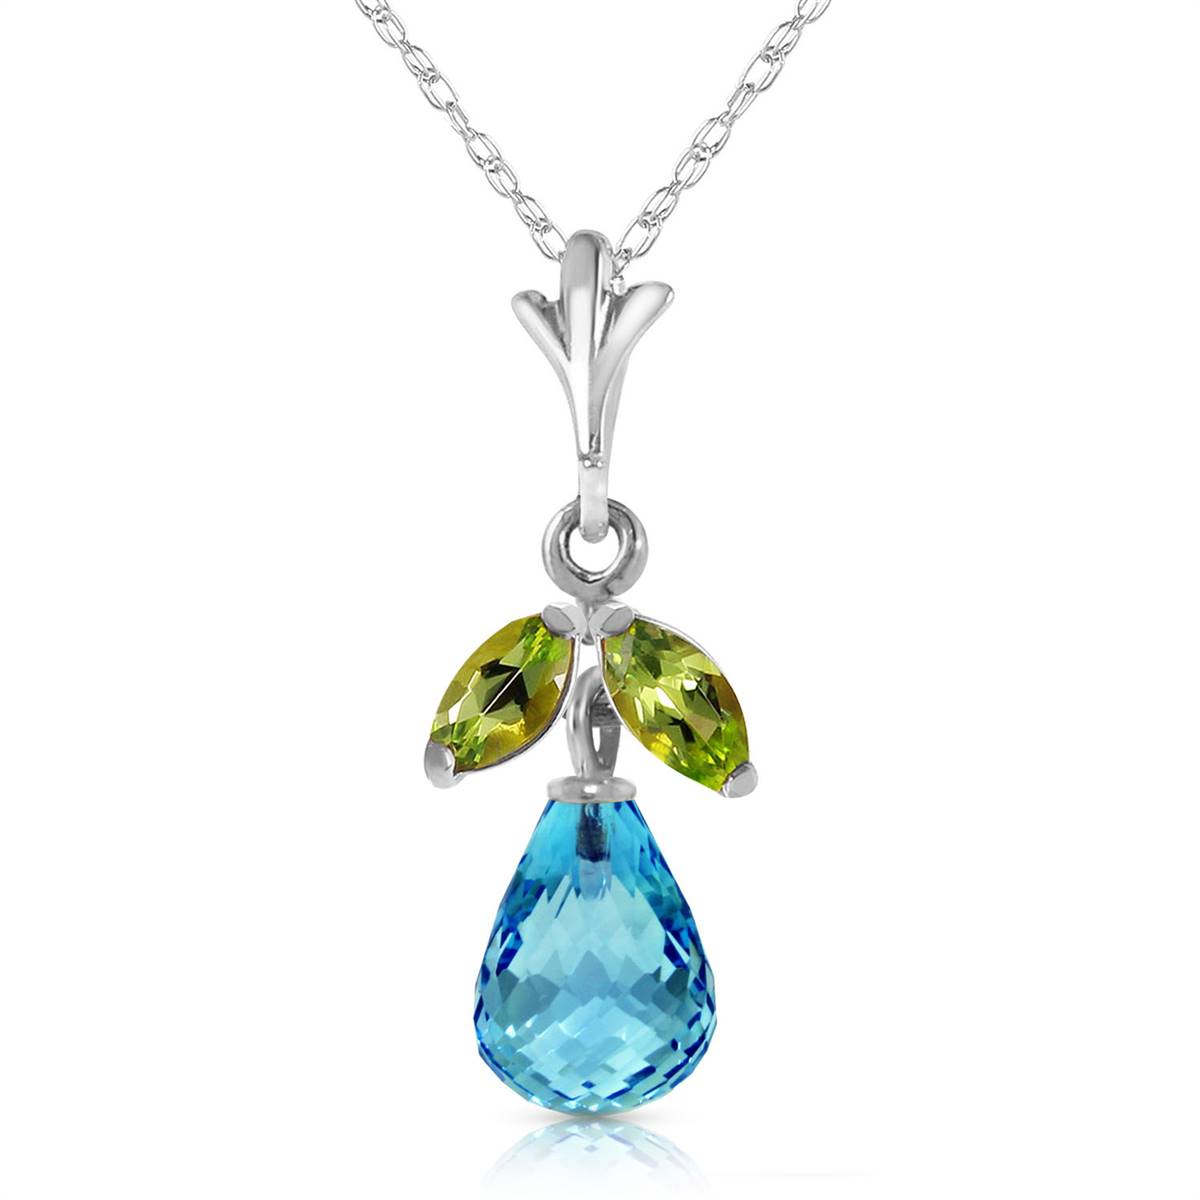 1.7 Carat 14K Solid White Gold Charm You Blind Blue Topaz Peridot Necklace